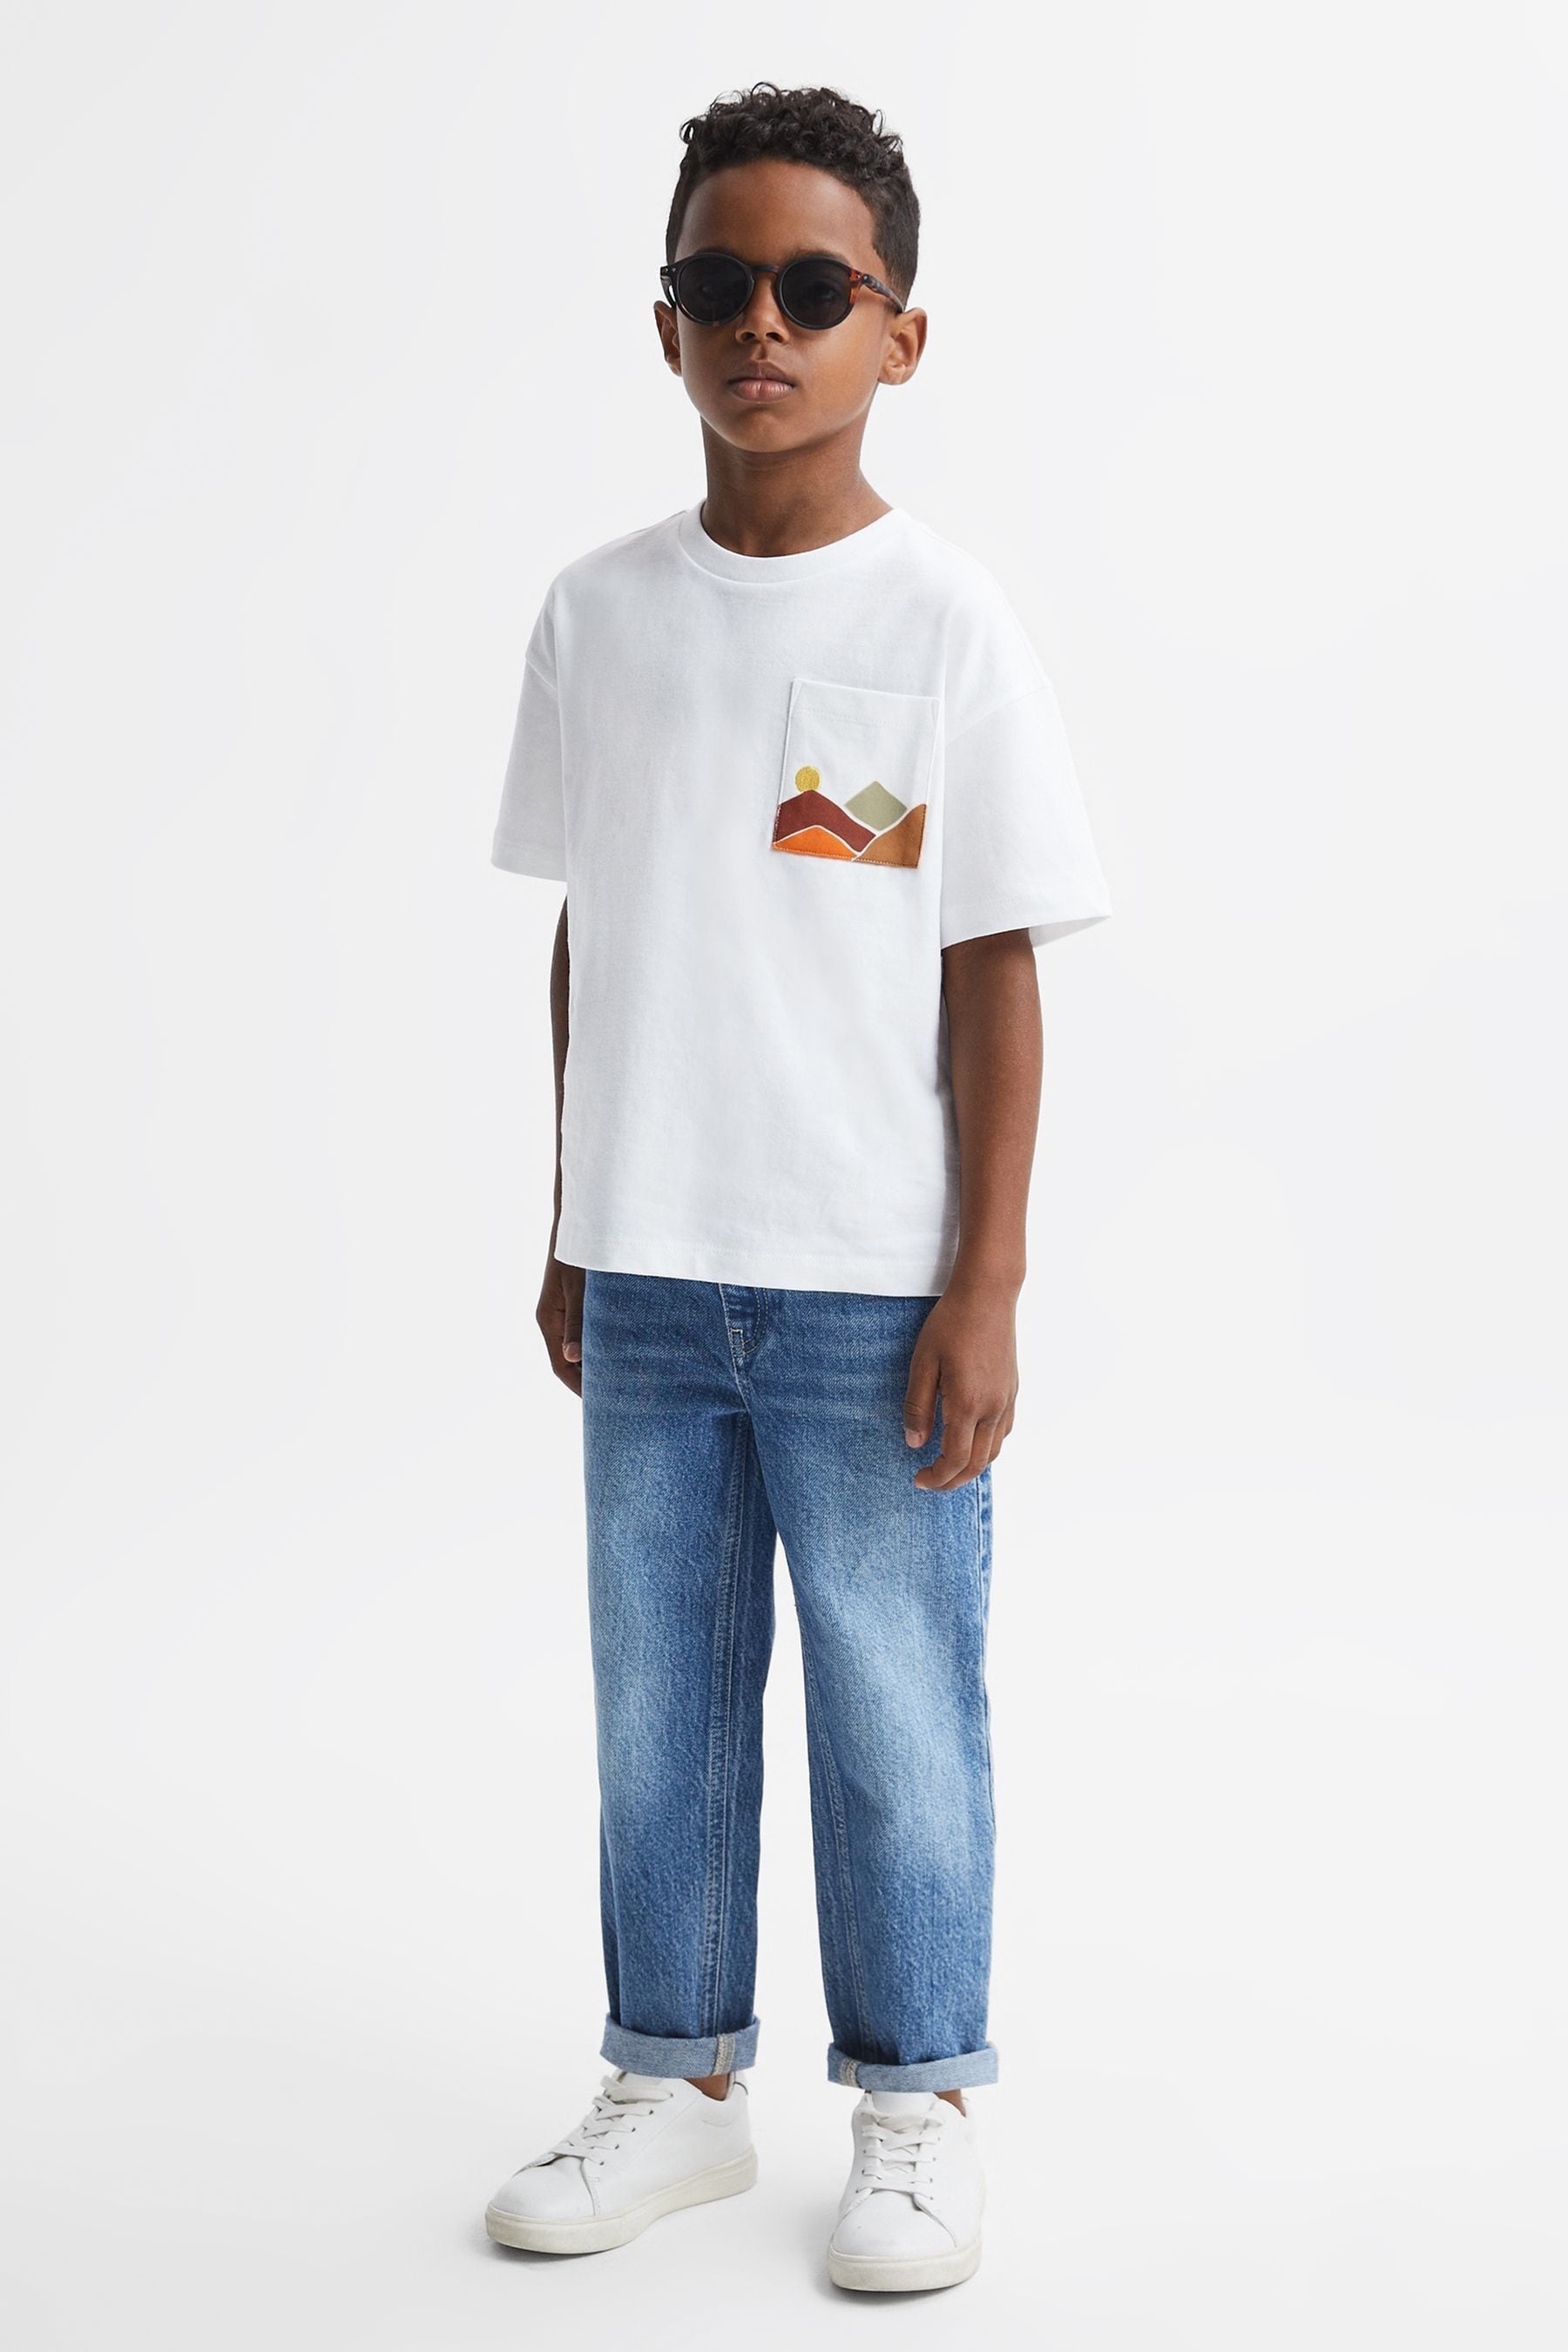 Reiss Dunes - White Junior Relaxed Fit Cotton Motif T-shirt, Age 3-4 Years